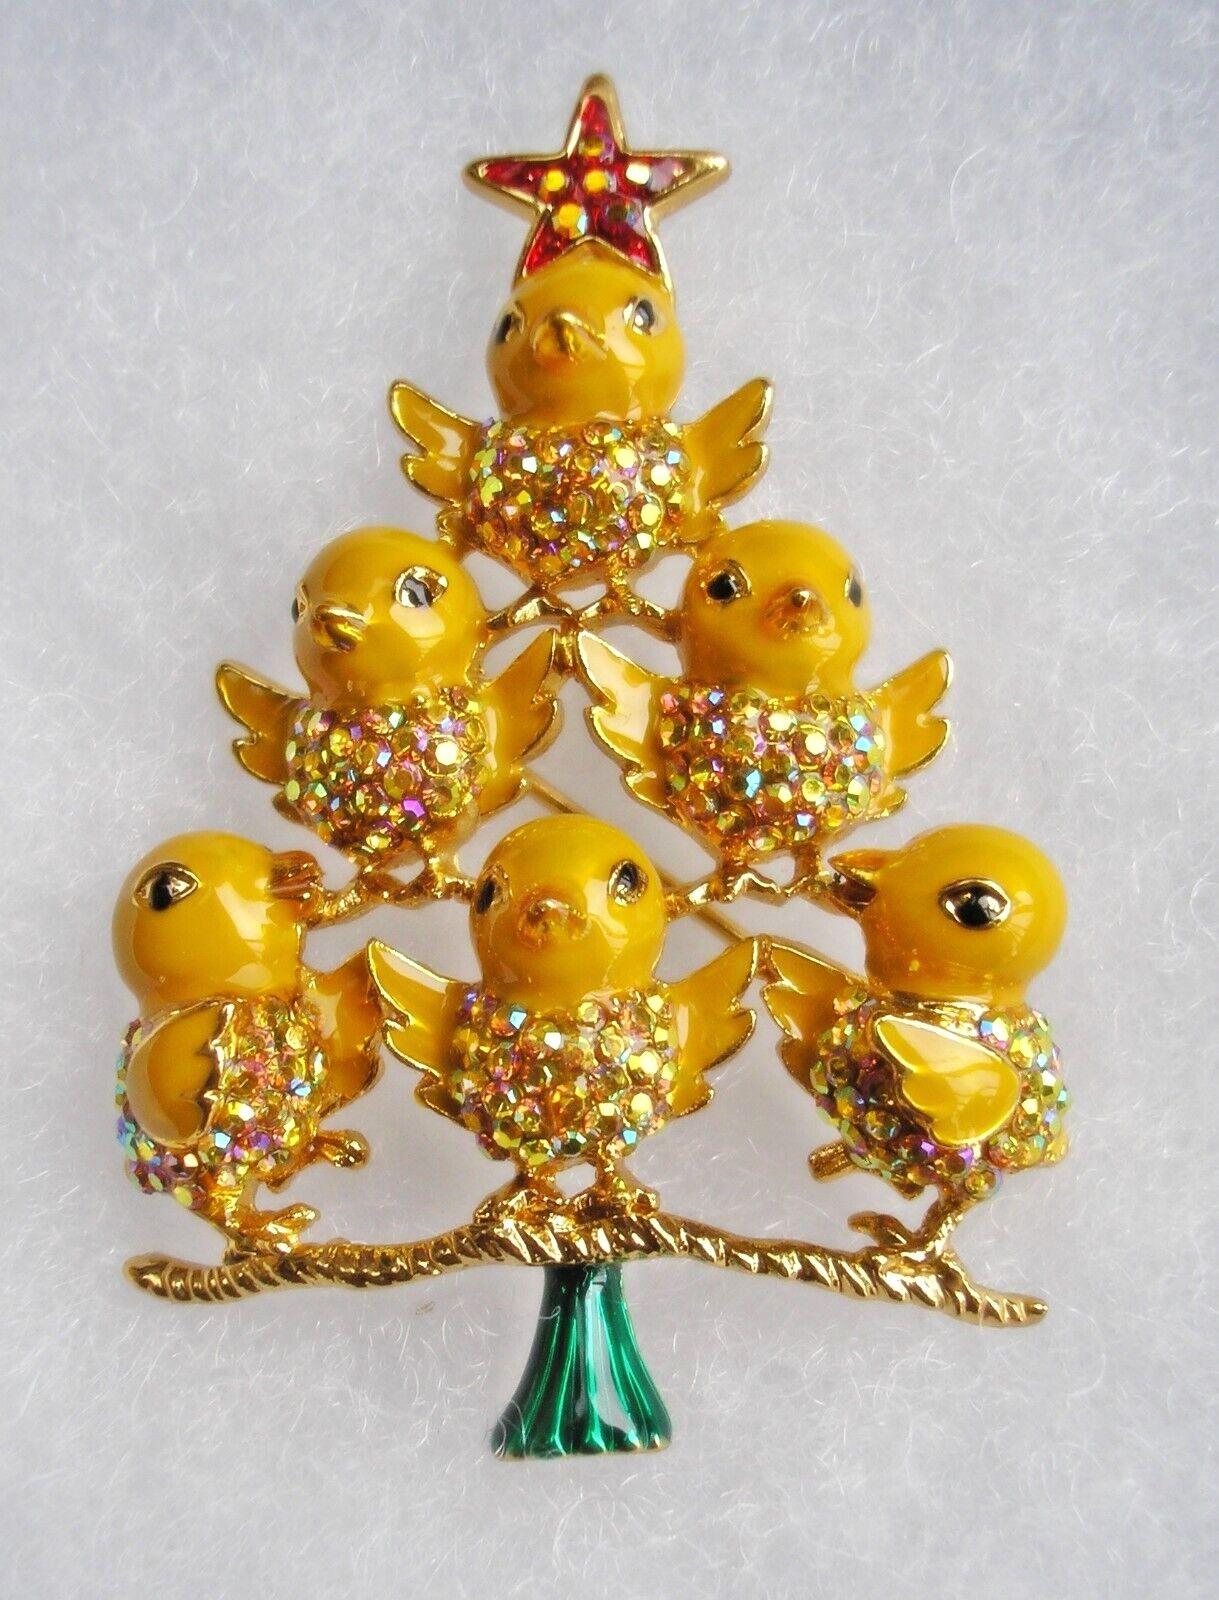 Simply Beautiful! Butler & Wilson BW Designer Signed Christmas tree composed of Yellow Chicks set with Aurora Borealis stones and topped by a Red Star. In Gold tone mounting. Measuring approx. 2.5” high. Perfect, new condition. More Beautiful and